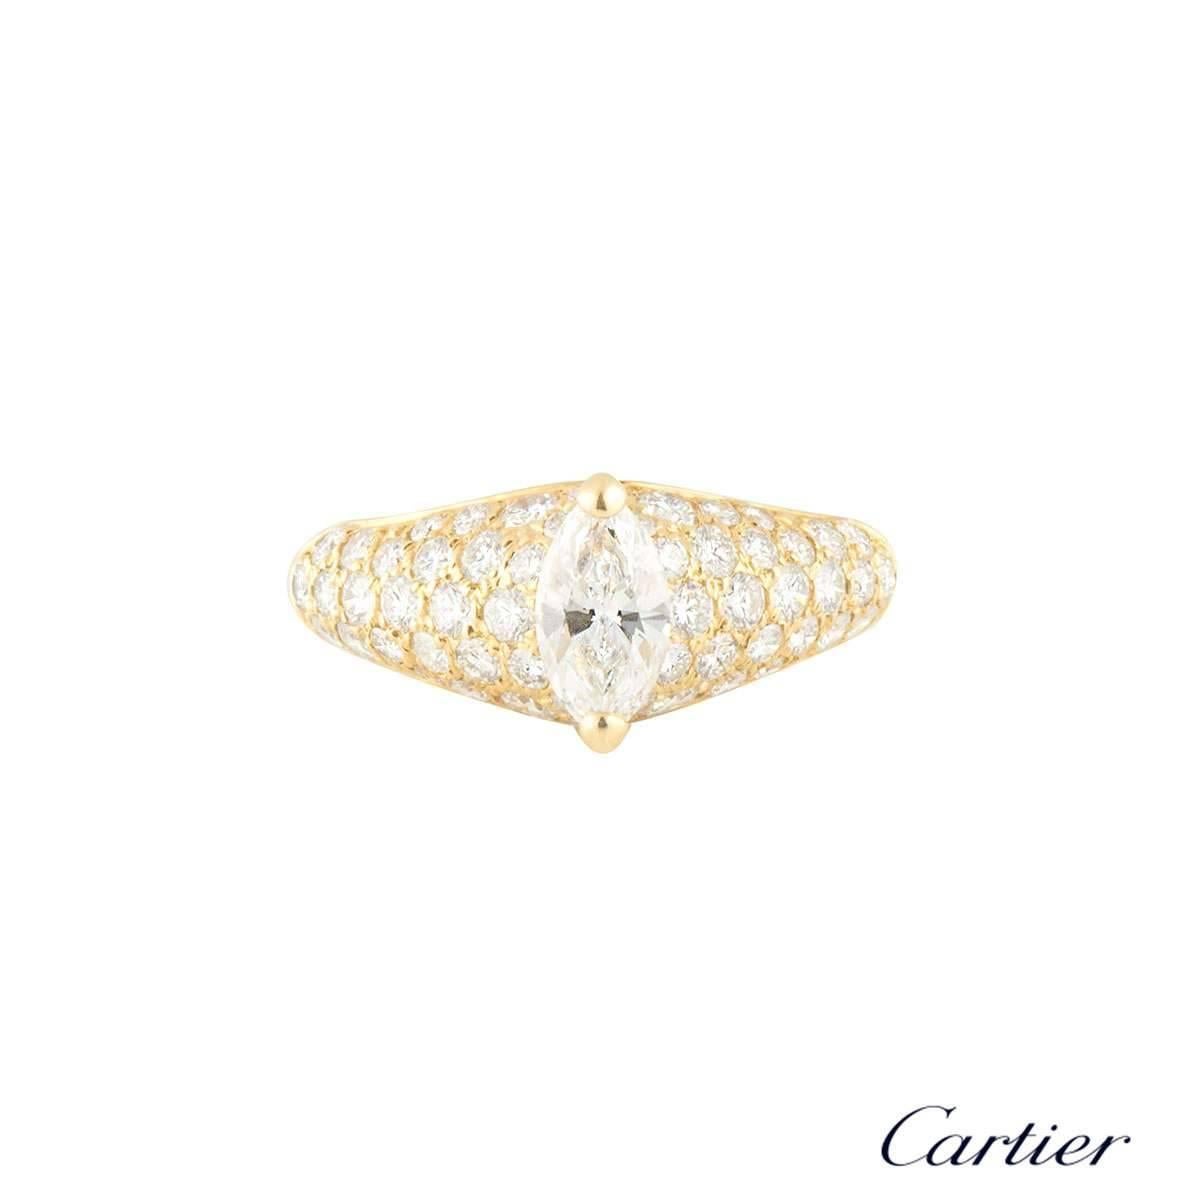 A sparkly 18k yellow gold Cartier diamond engagement ring. The ring comprises of a marquise cut diamond in a 2 claw settings with a total weight of approximately 0.75ct, G colour and VVS2. The diamond is complimented with 54 round brilliant cut